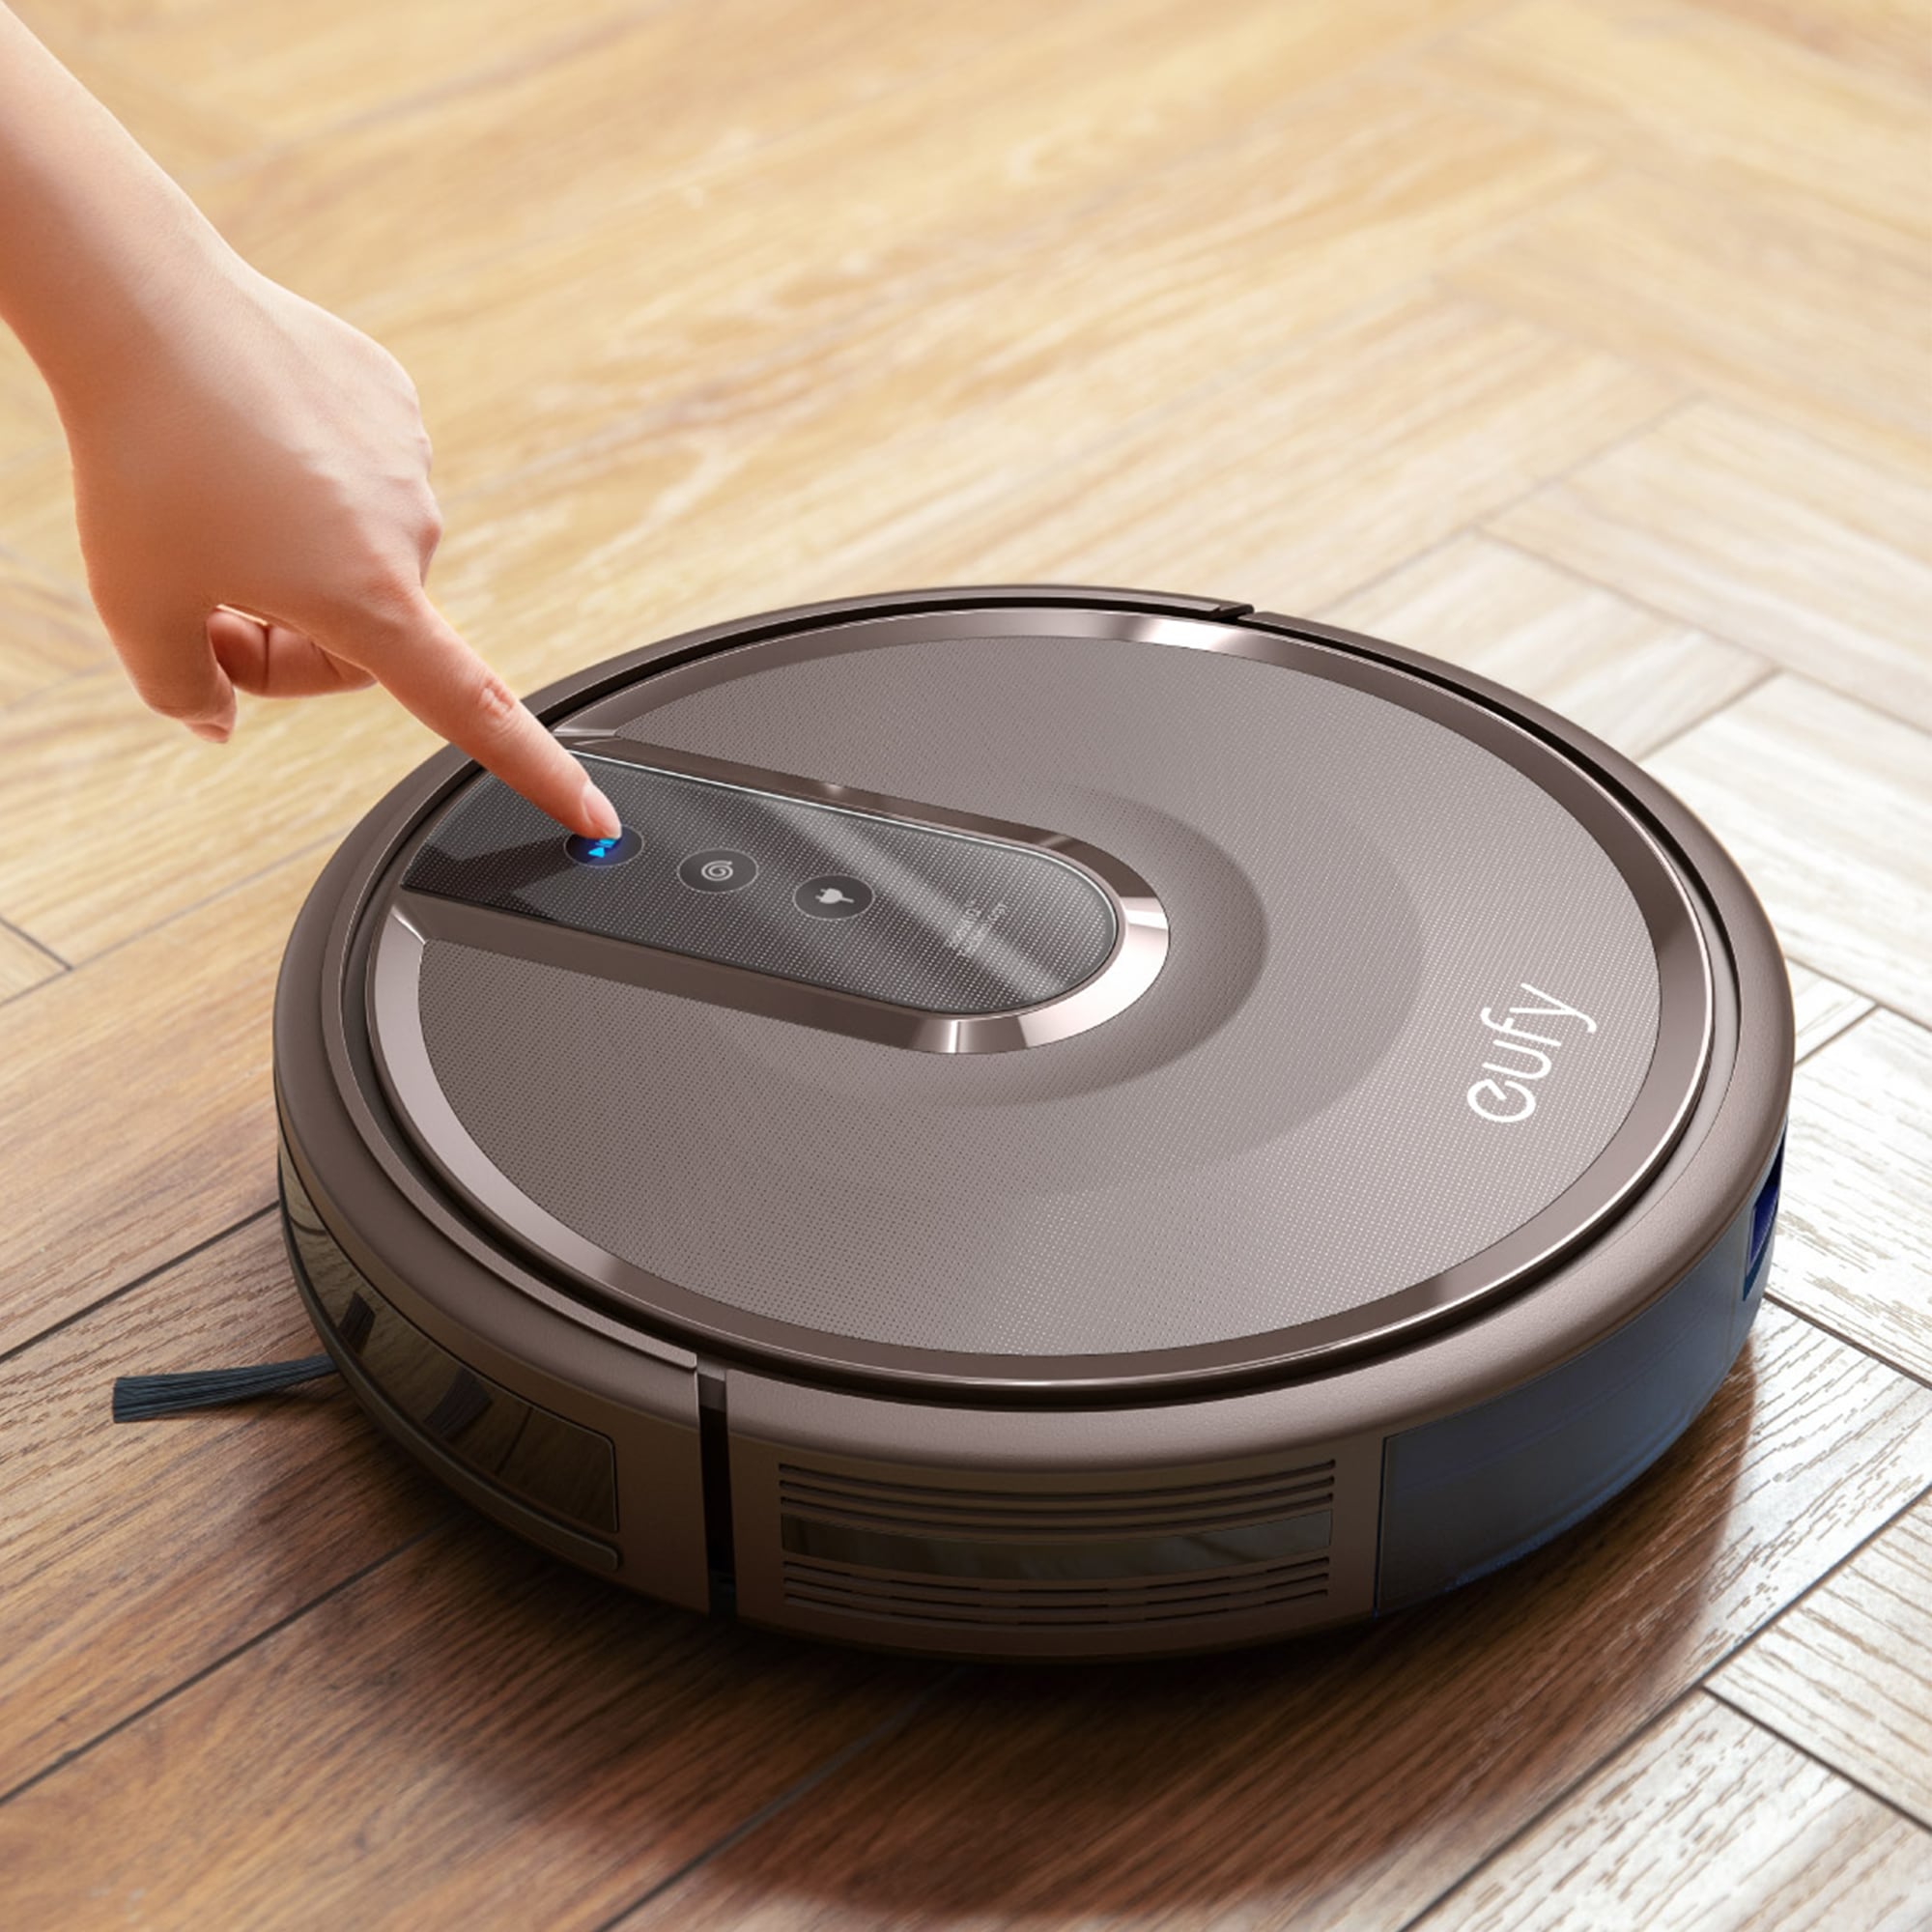 Anker eufy Robvac 15T Auto Charging Robotic Vacuum with HEPA Filter